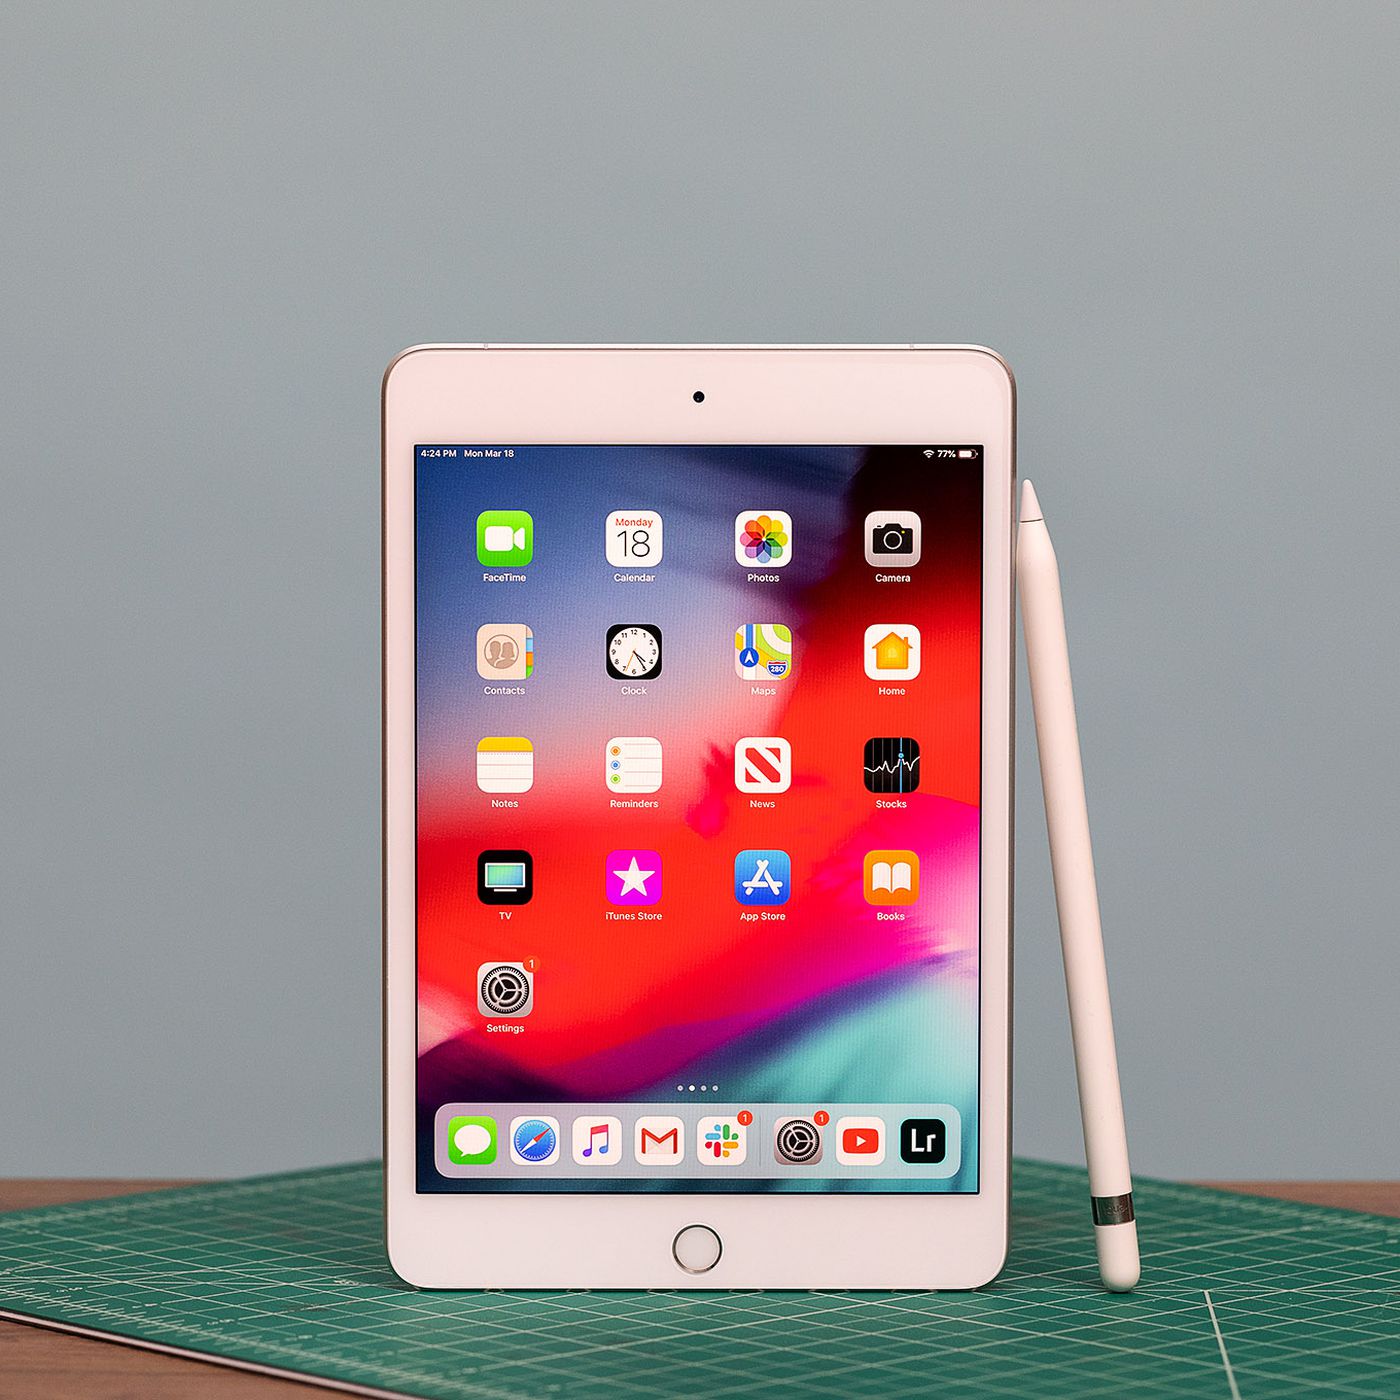 Redesigned Ipad Mini Reportedly On Track To Launch This Fall The Verge